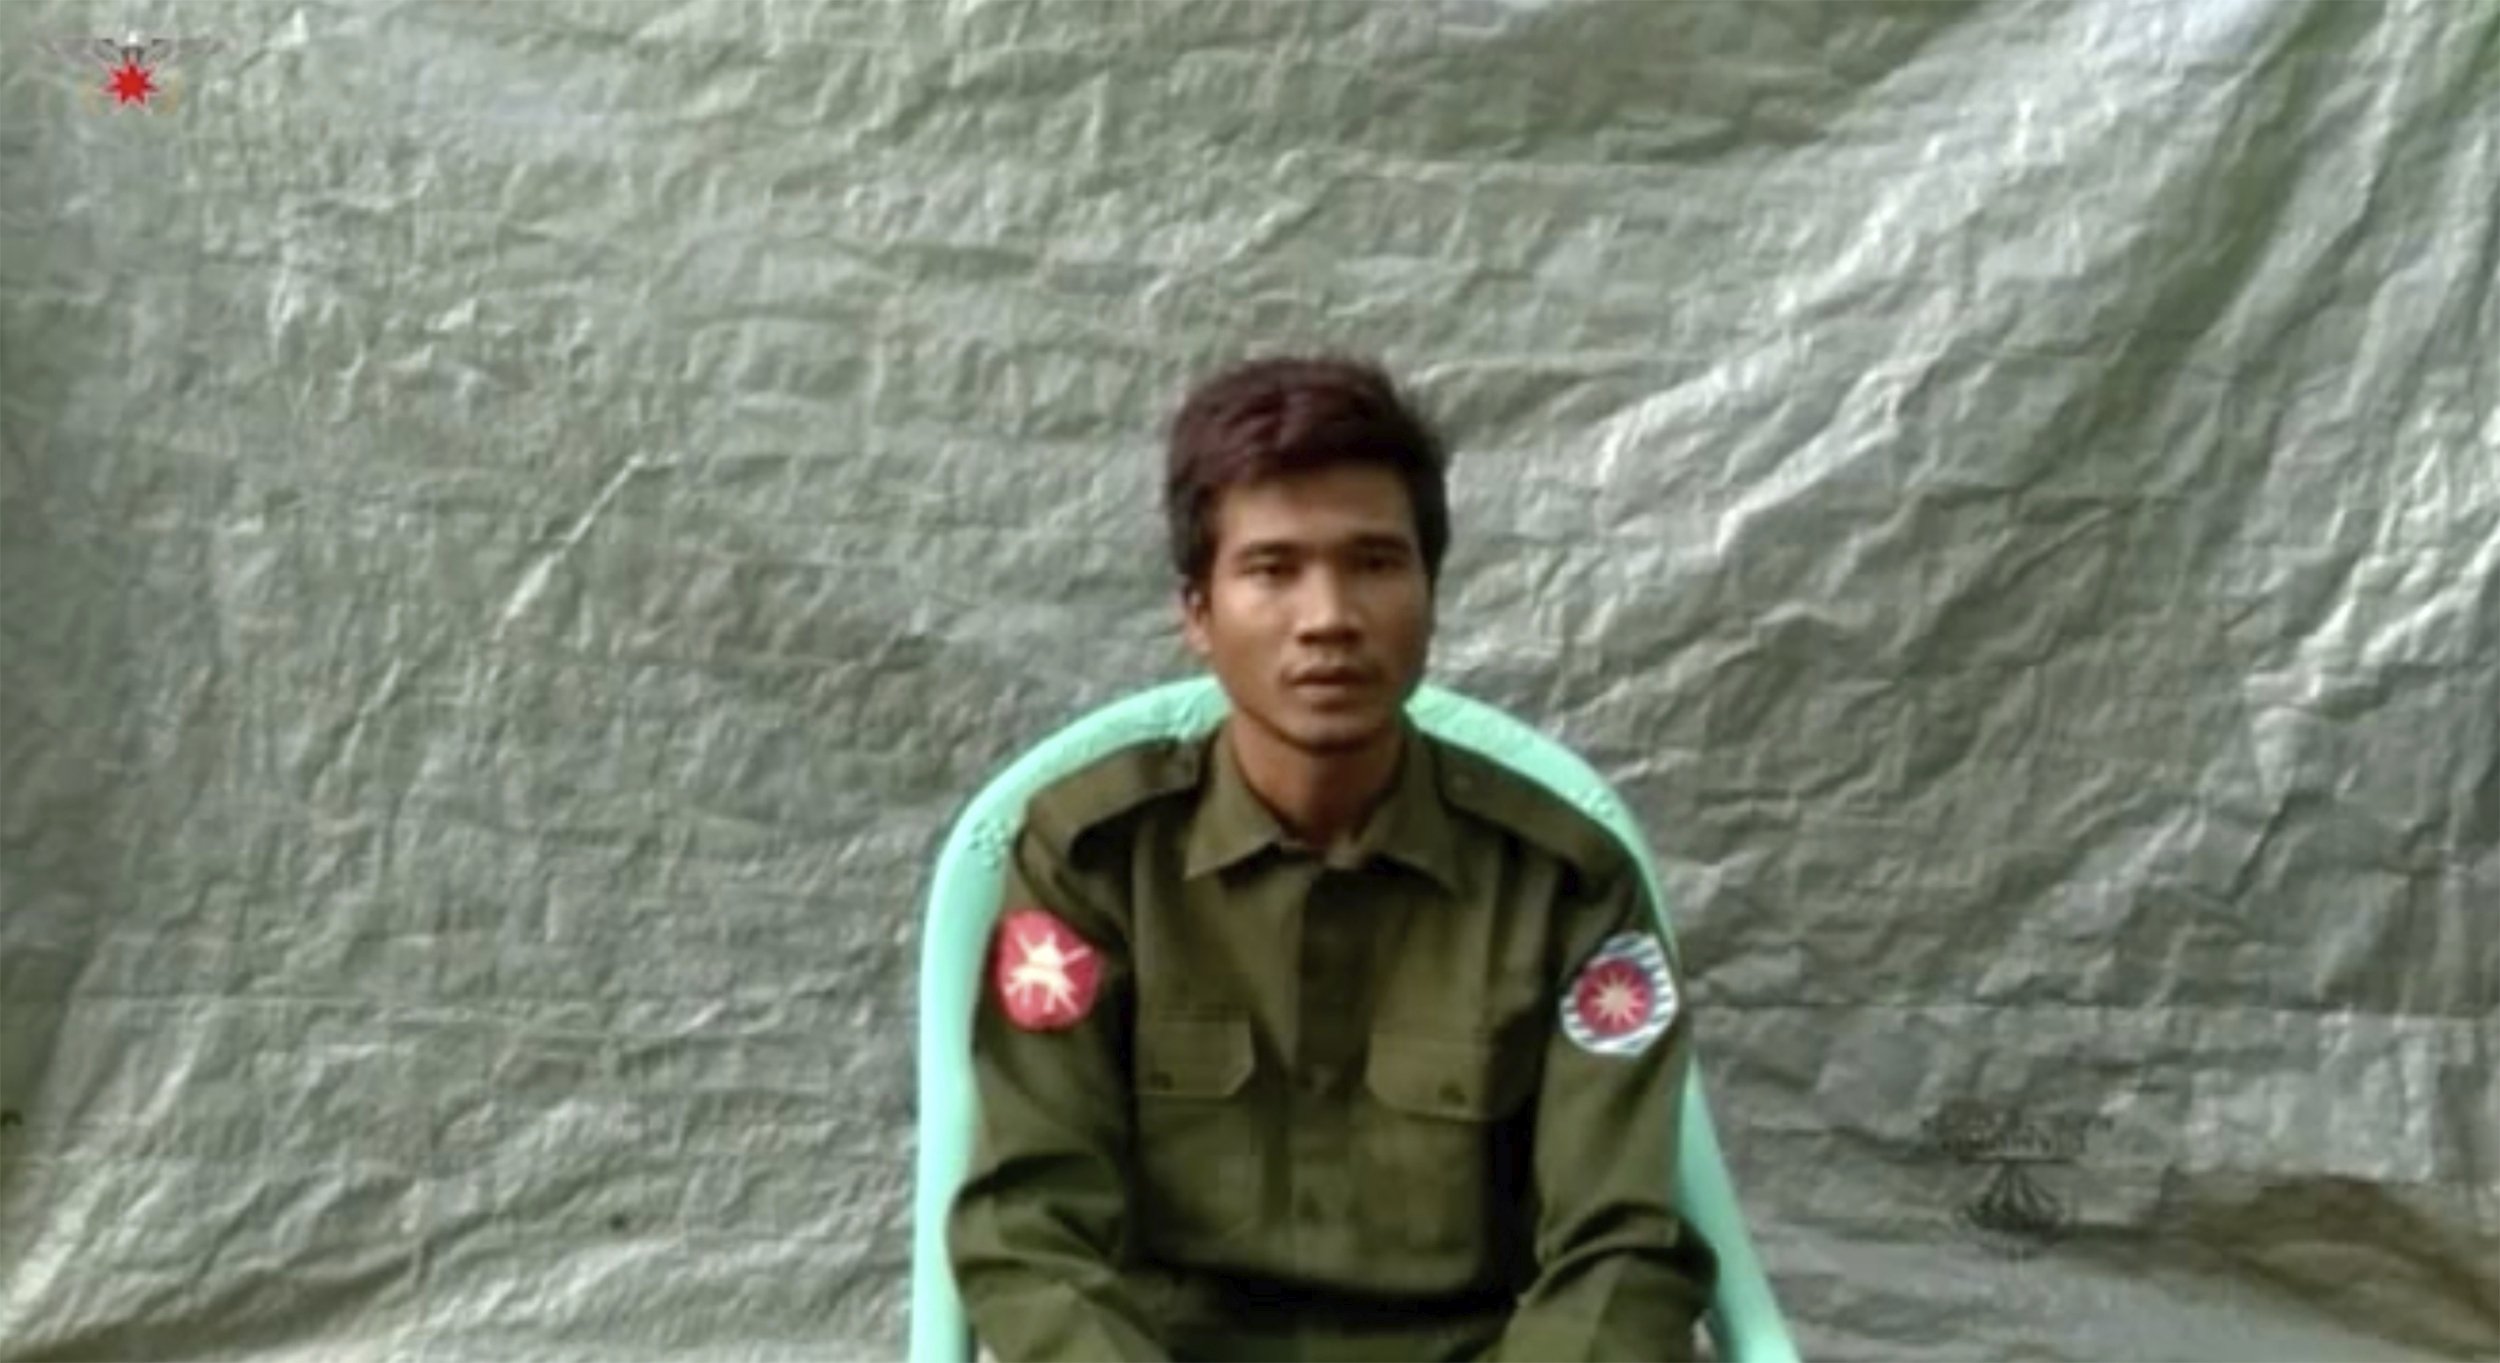 Private Zaw Naing Tun provides a video testimony from an undisclosed location somewhere in Myanmar on July 8, 2020. (Arakan Army Photo via AP)